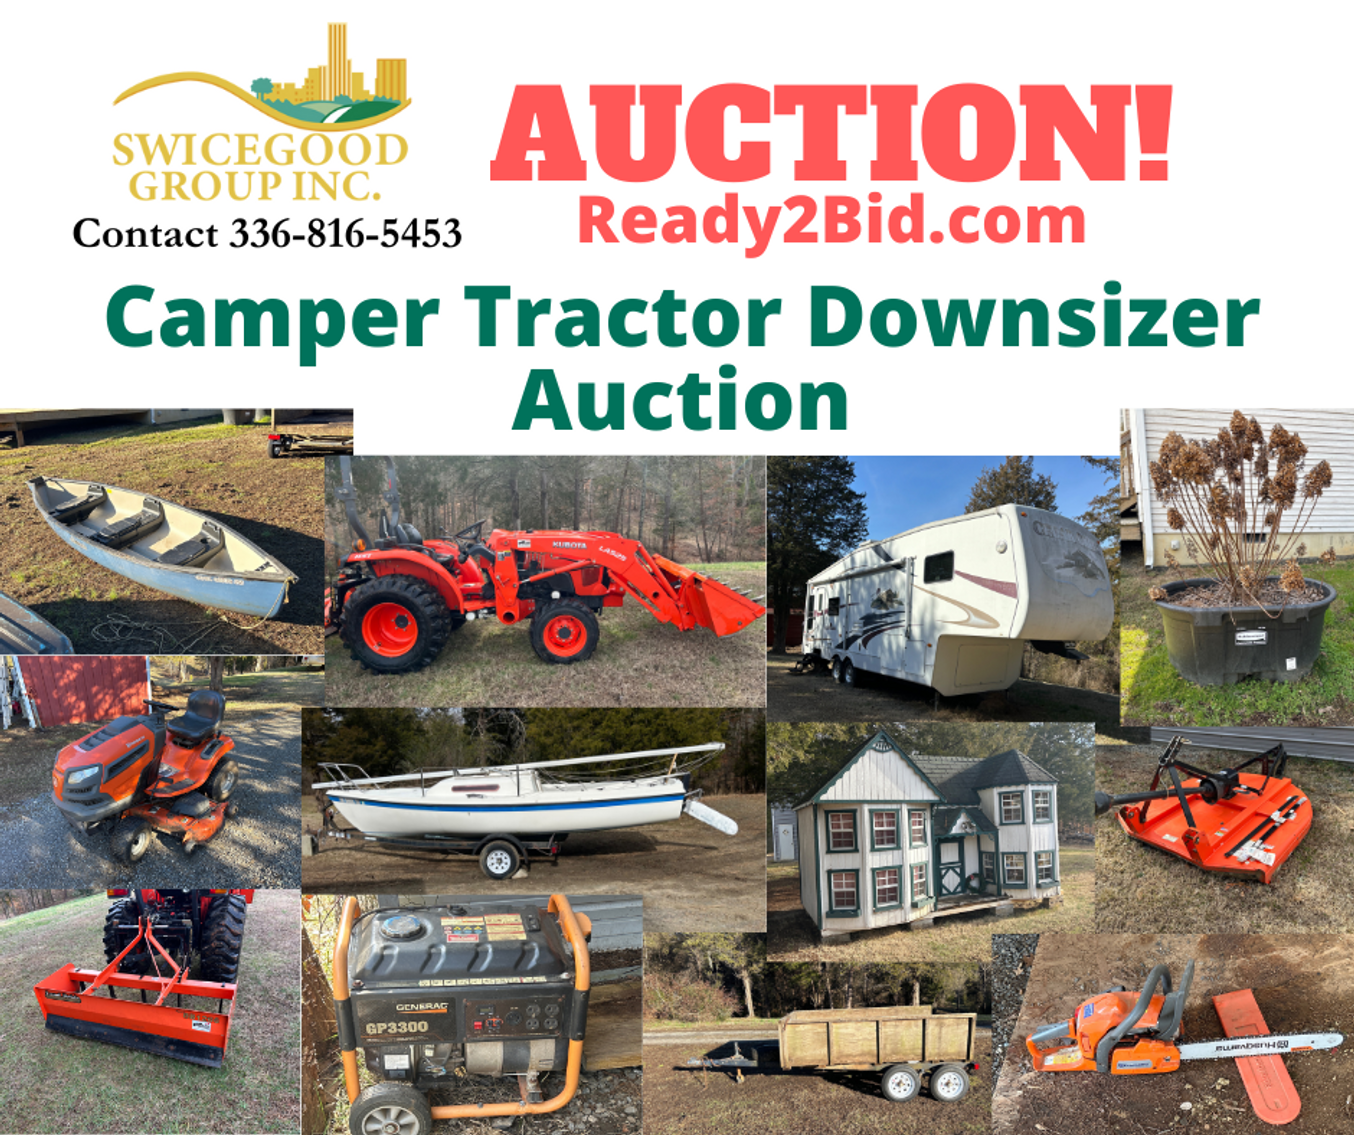 Camper Tractor Downsizer Auction